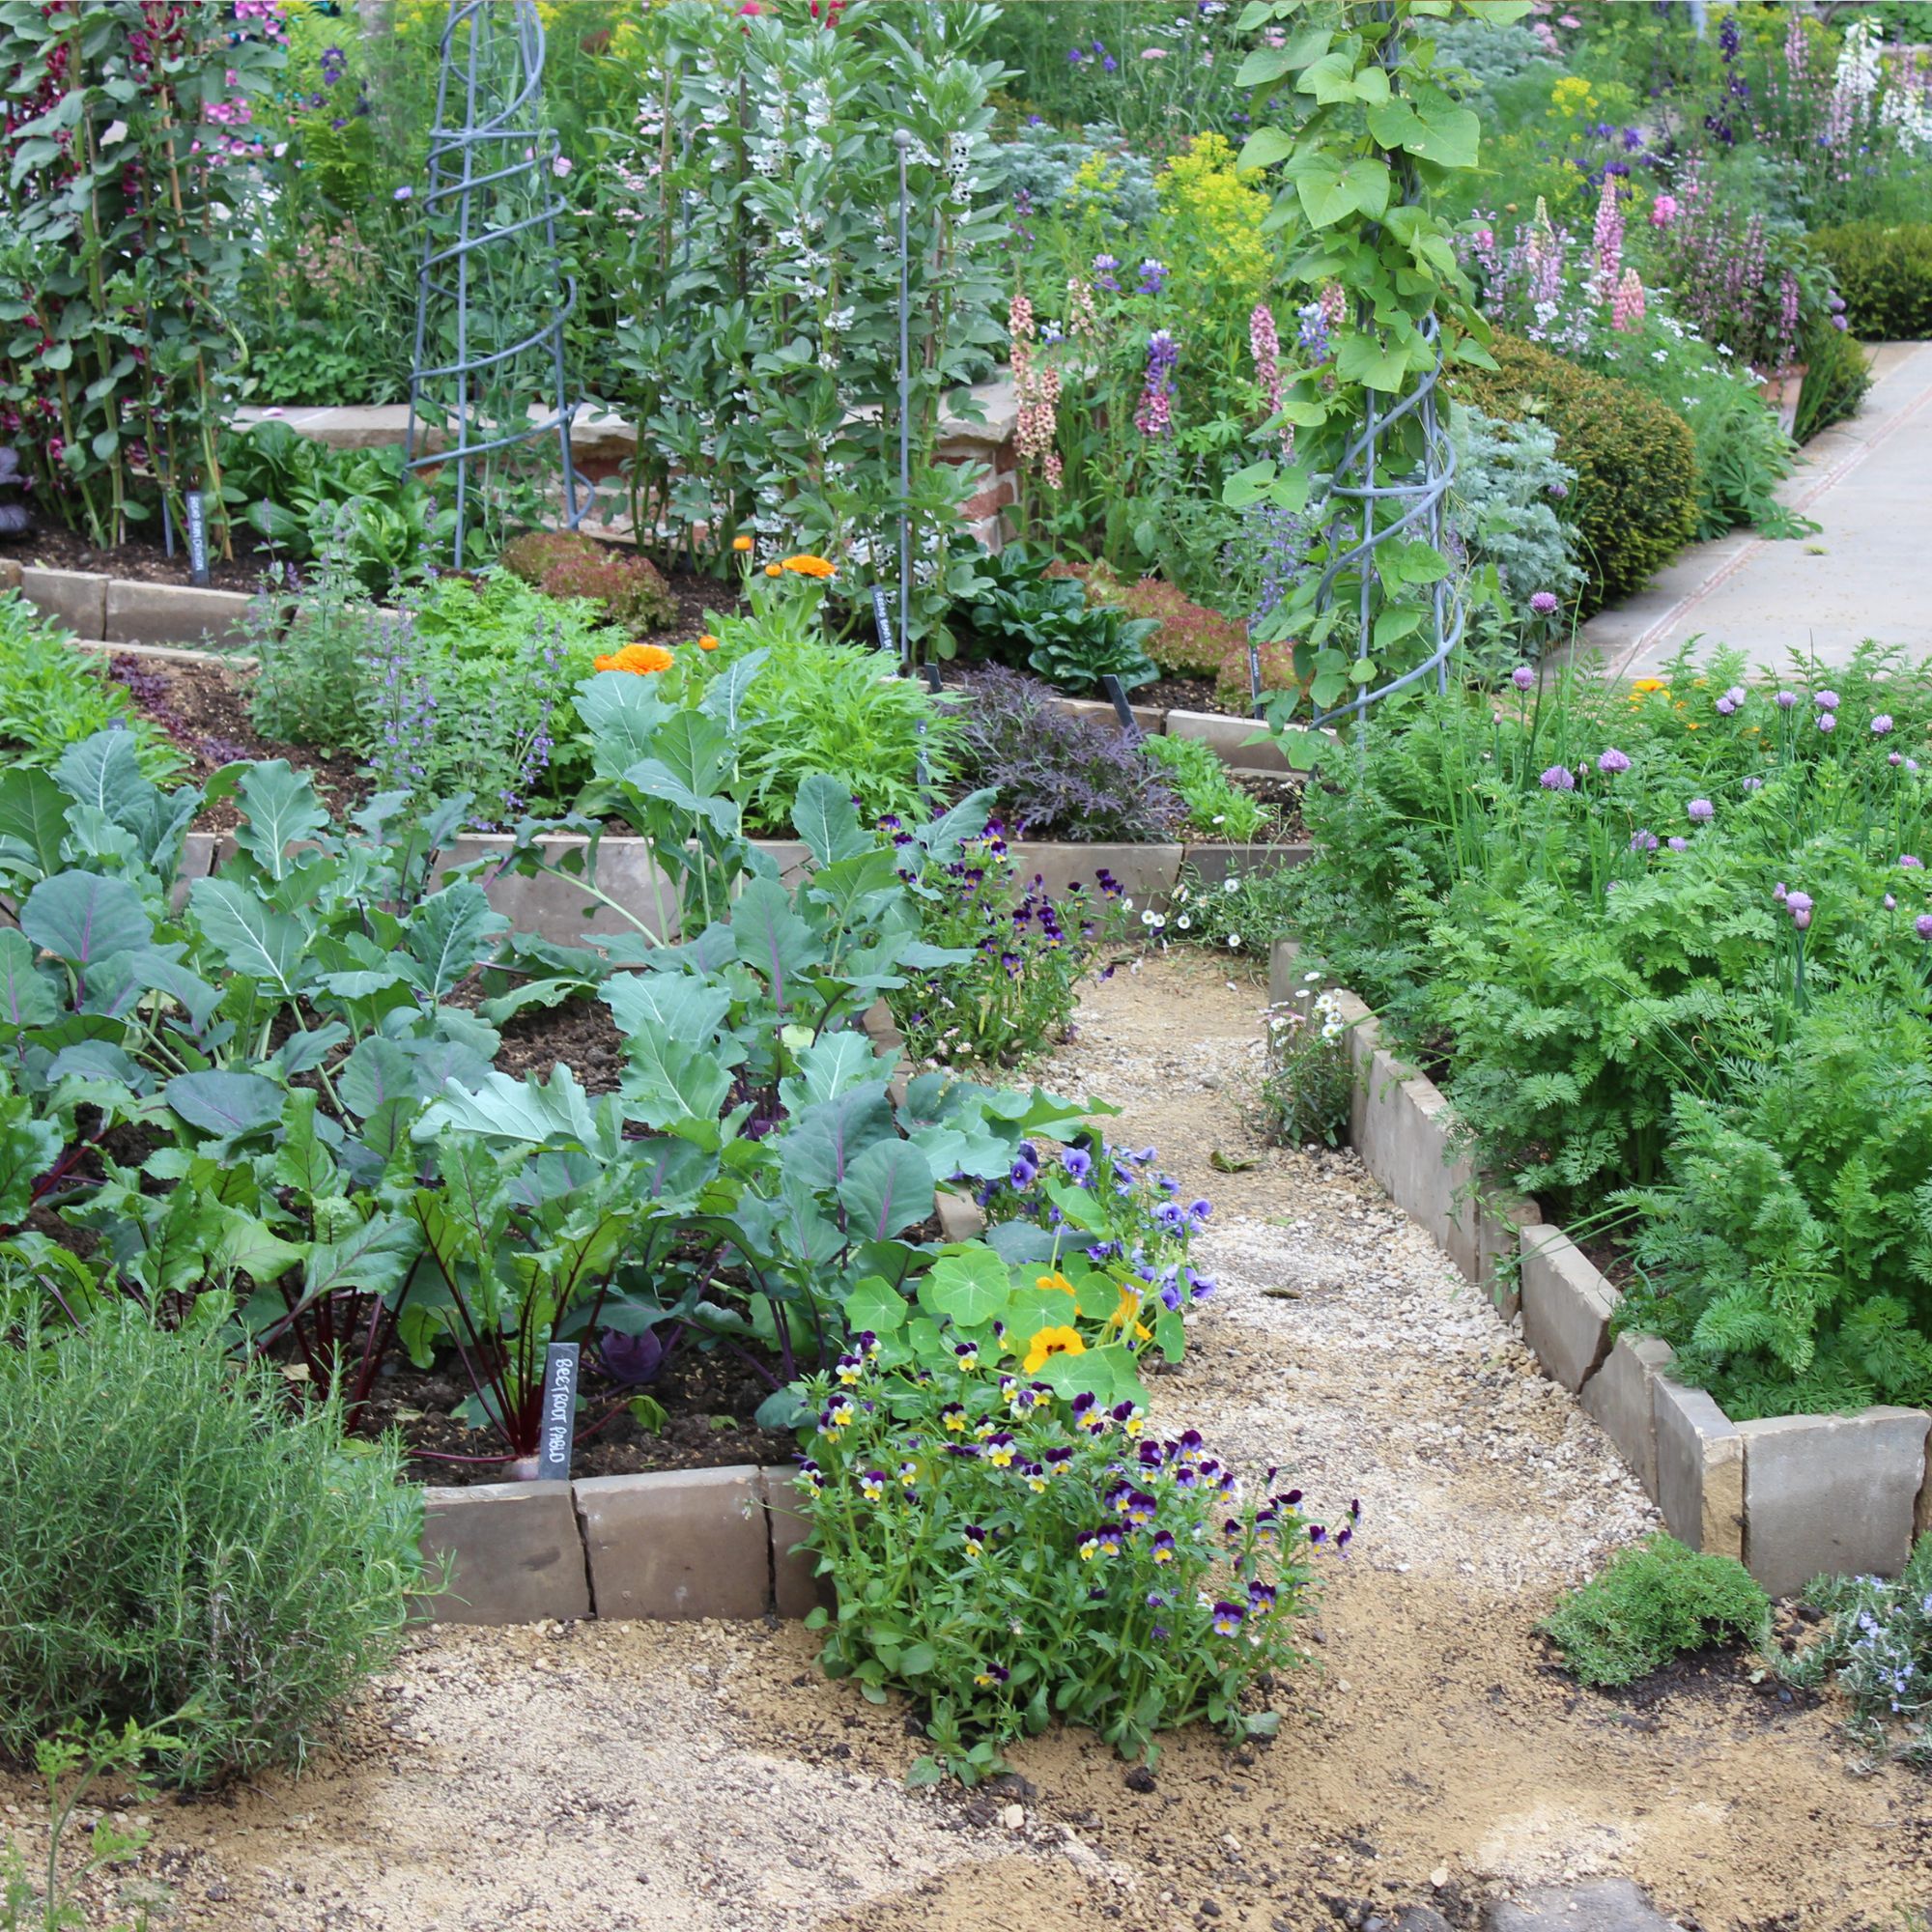 One of the vegetable plots at RHS Chelsea 2023